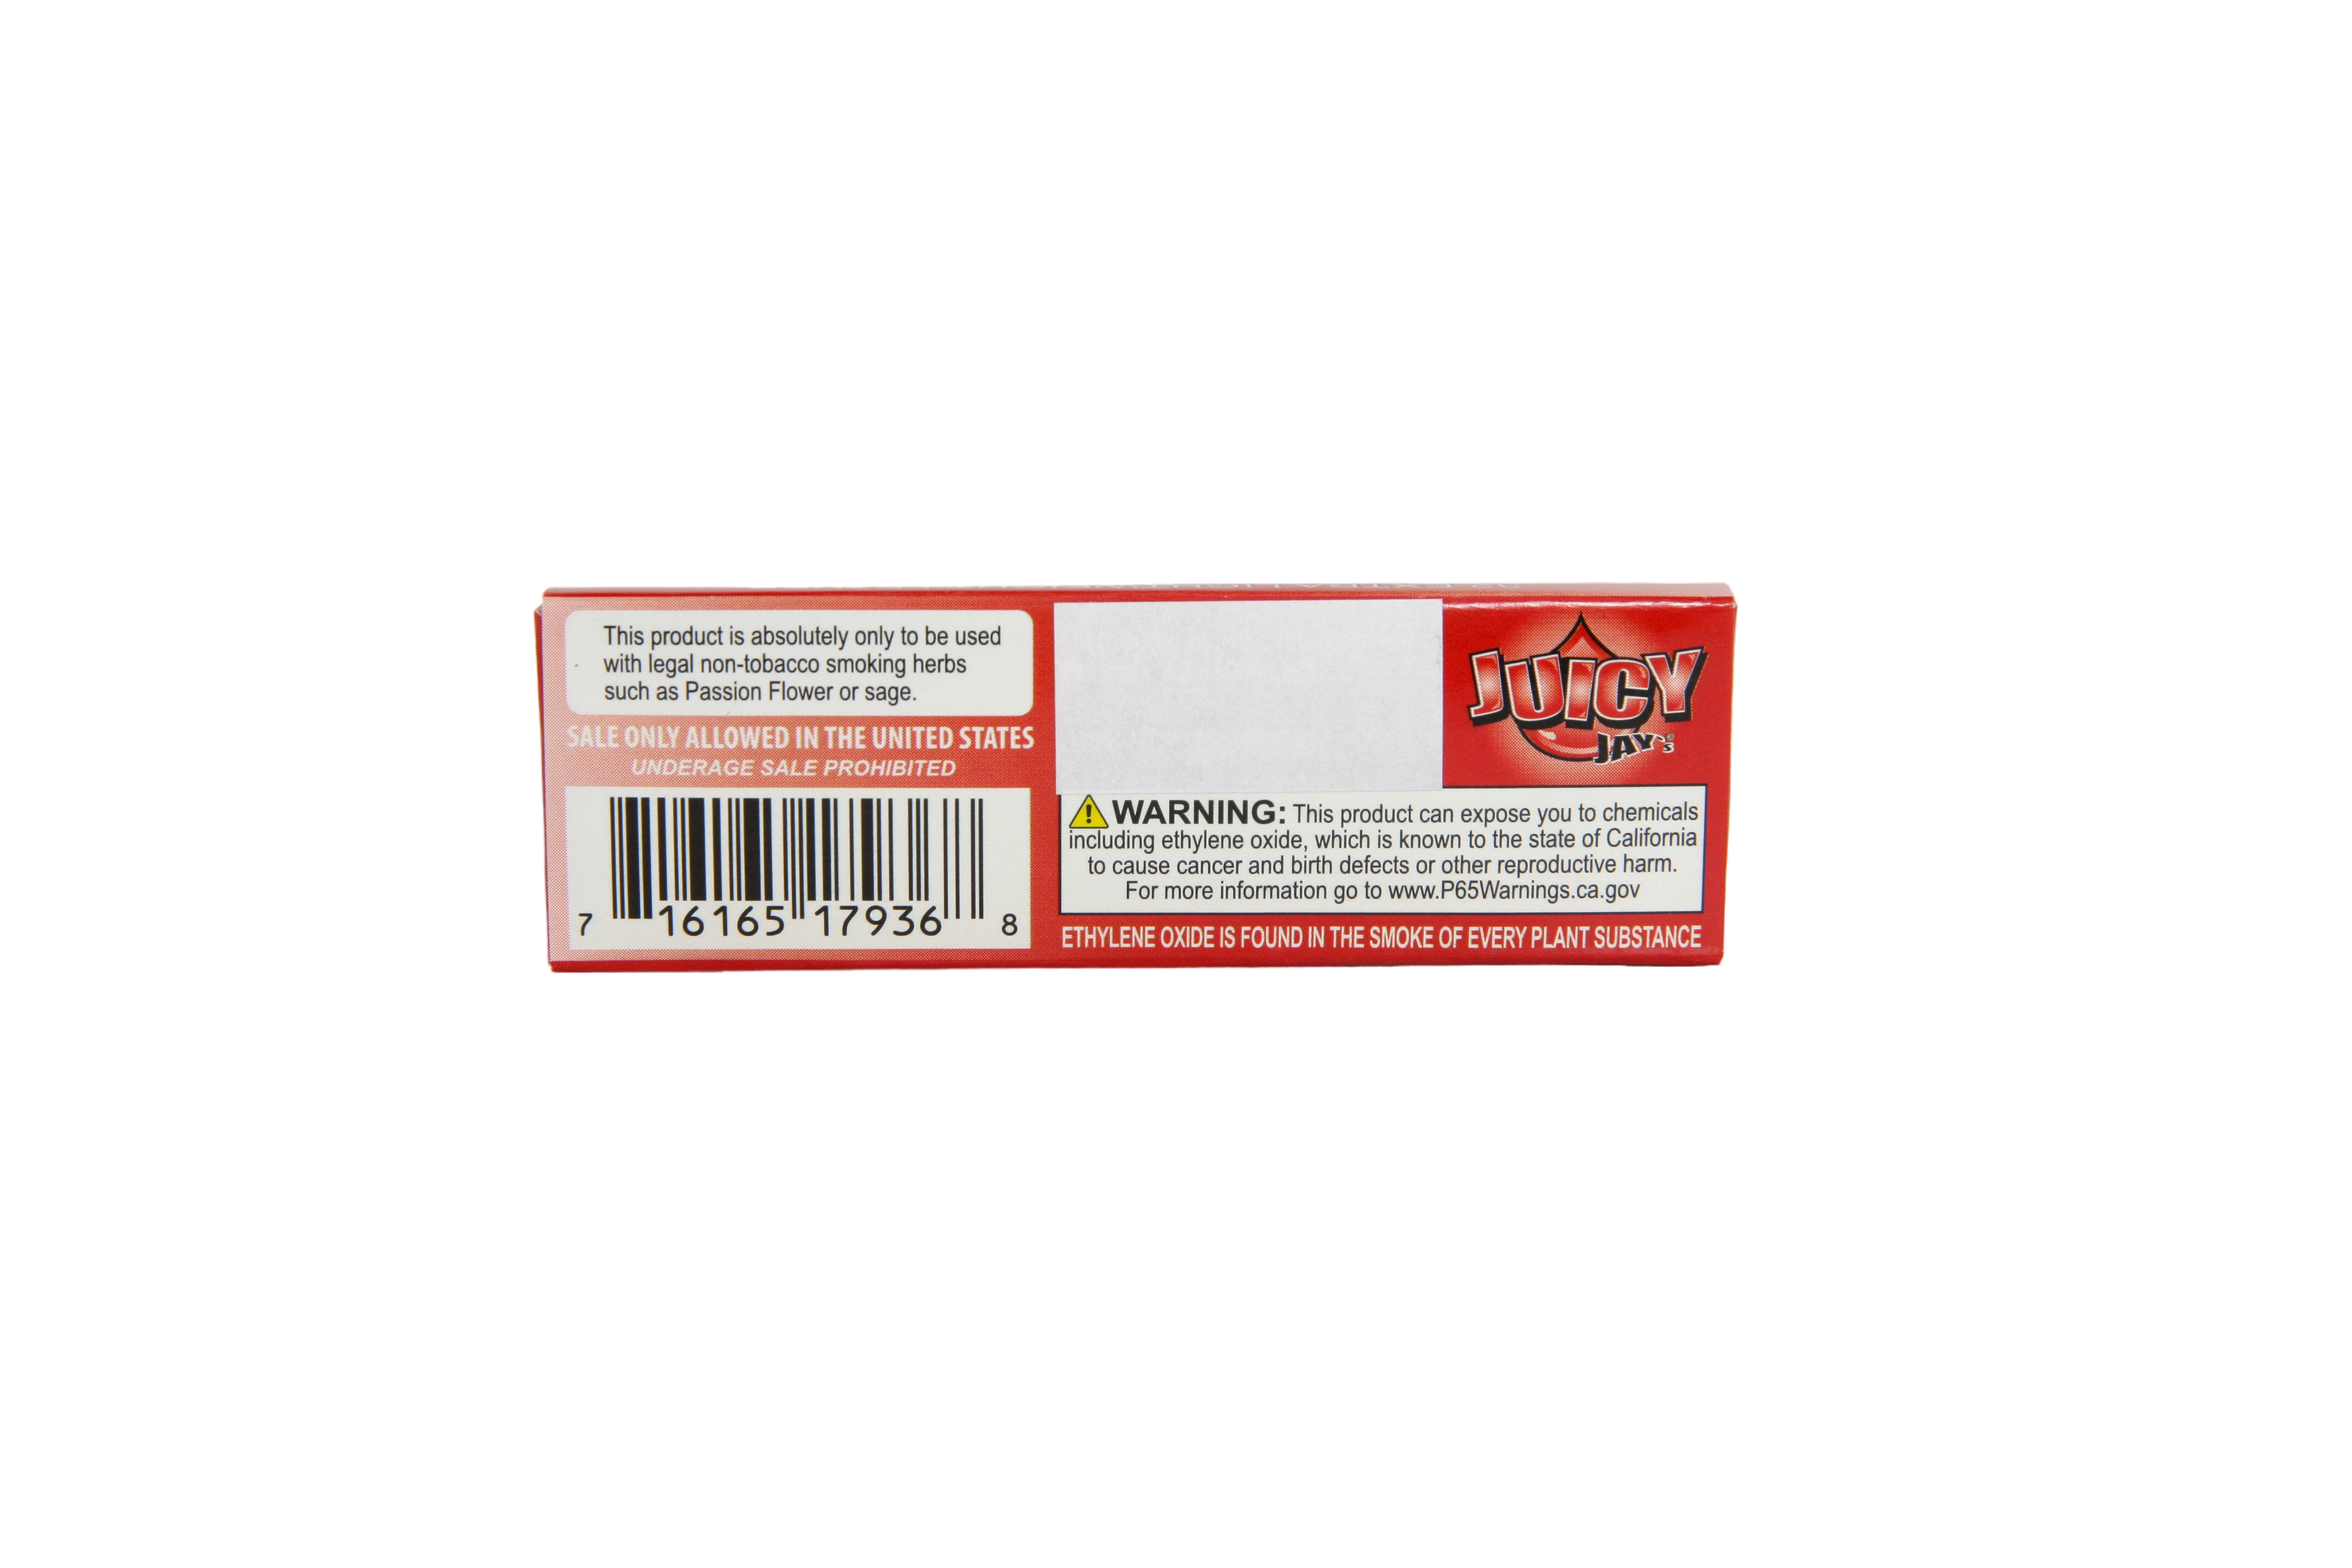 Juicy Jays Strawberry Papers - 1 1/4